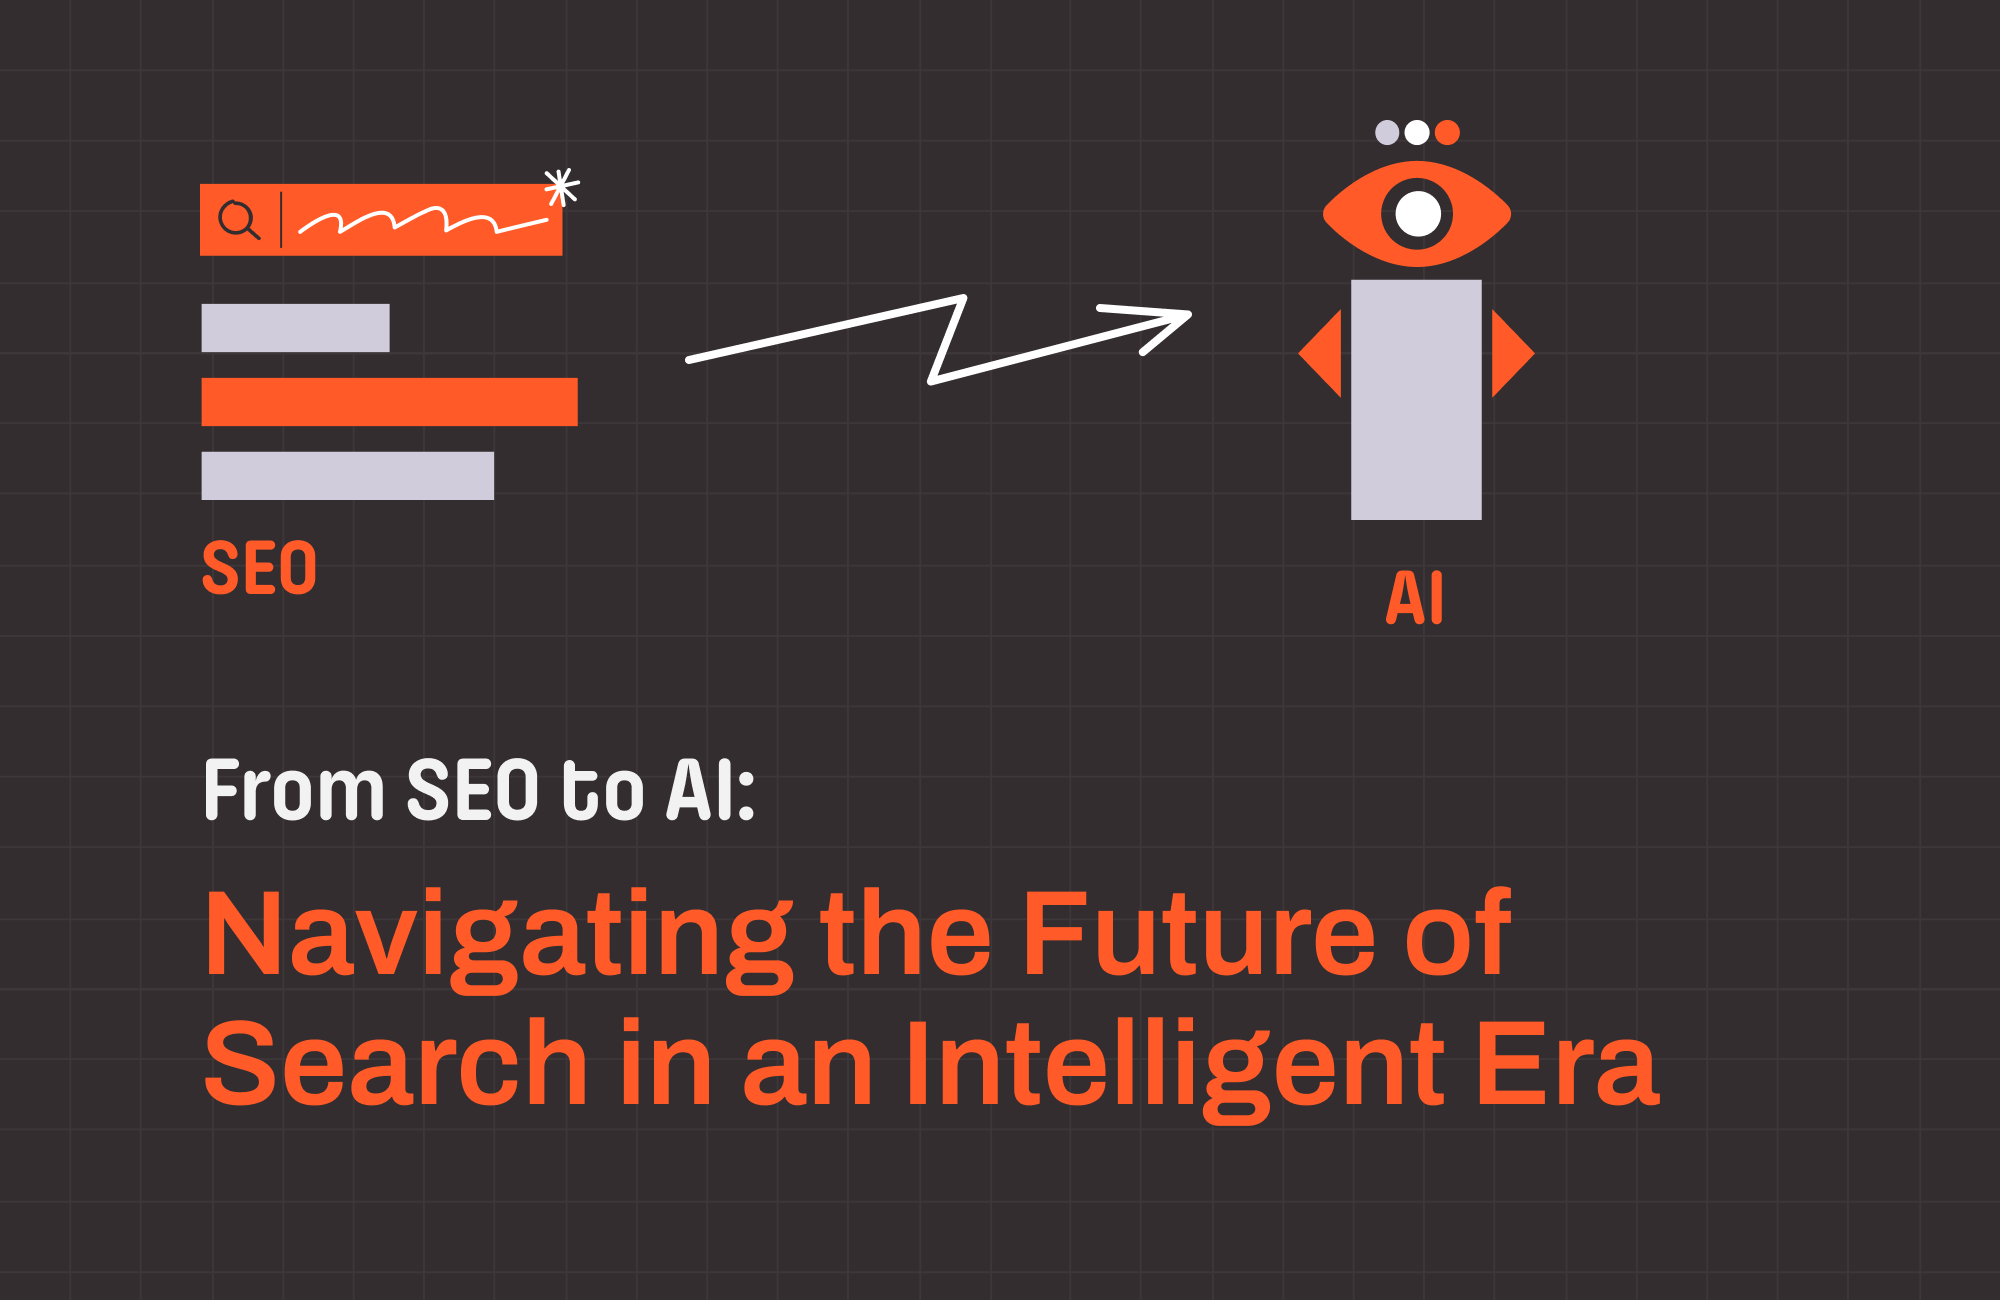 From SEO to AI: Navigating the Future of Search in an Intelligent Era